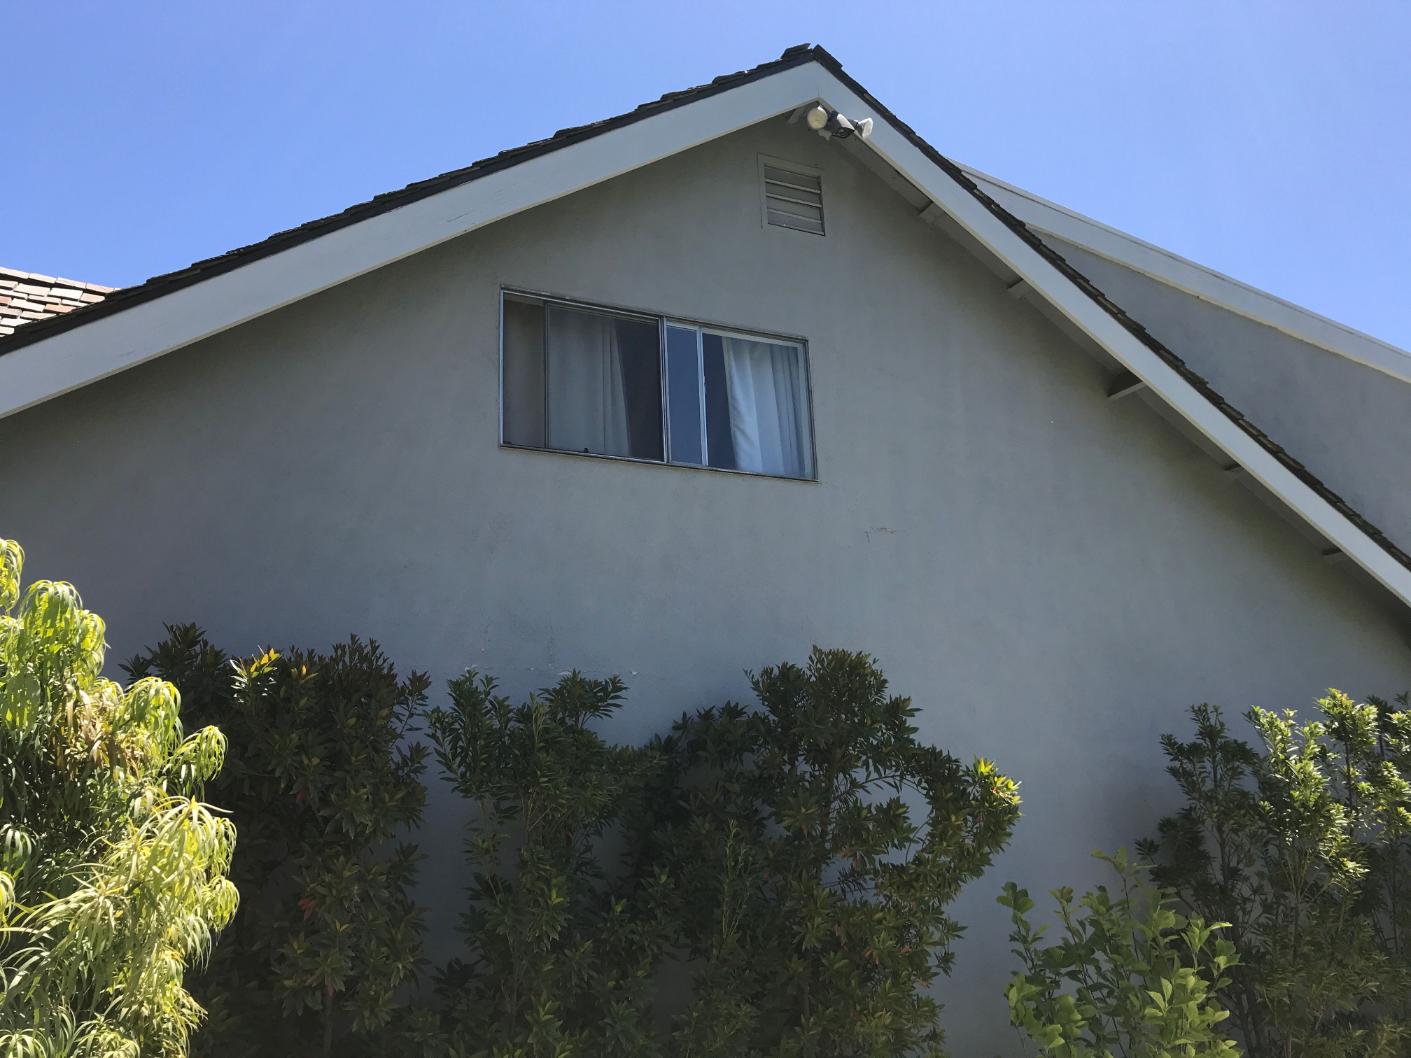 TexCote Exterior Coating Project in Whittier, CA